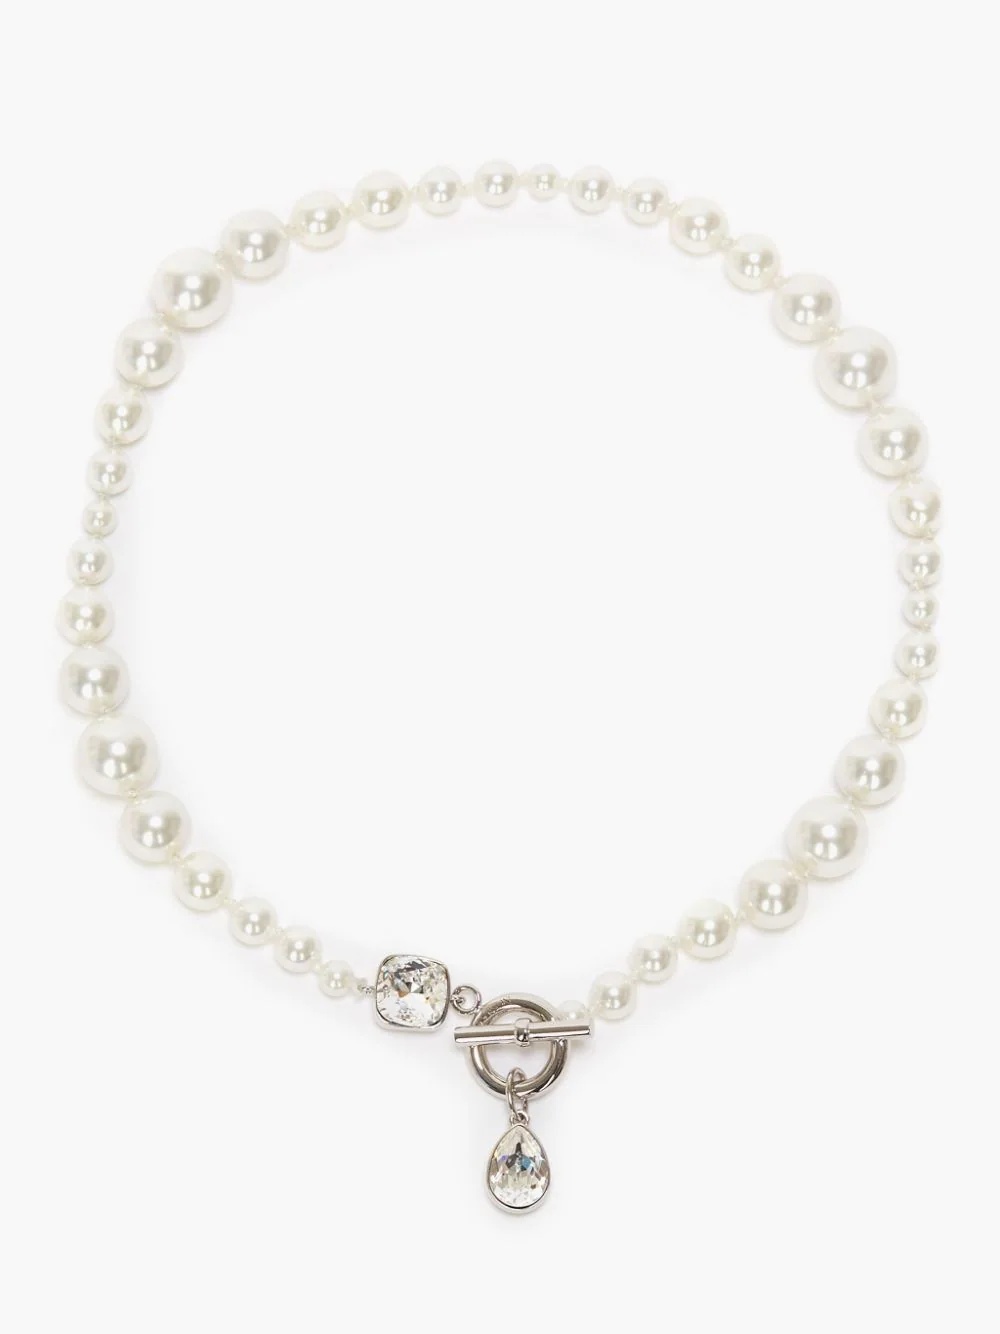 GRADUATED PEARL & CRYSTAL NECKLACE - 1